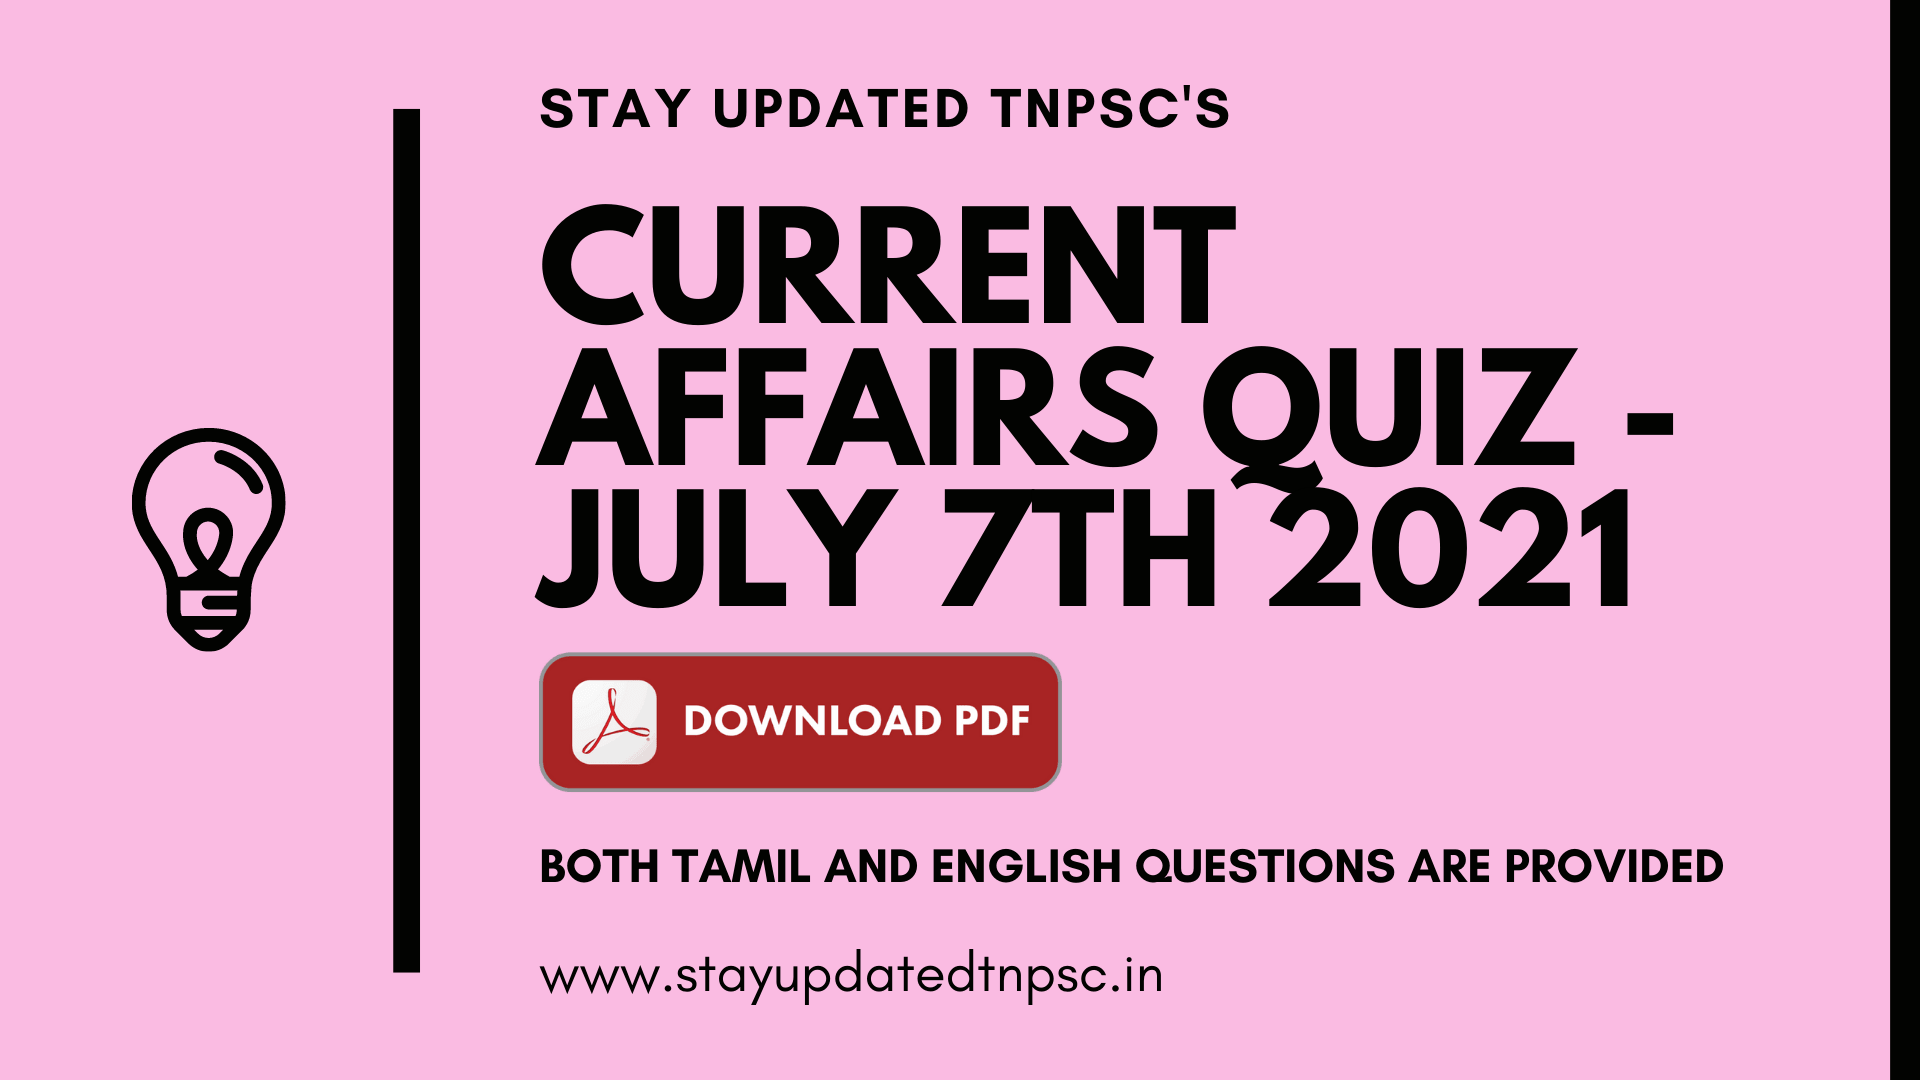 TNPSC DAILY CURRENT AFFAIRS: 07 JUNE 2021 TNPSC தினசரி நடப்பு நிகழ்வுகள்: 07 ஜூன் 2021 BOTH TAMIL AND ENGLISH QUESTIONS ARE PROVIDED DOWNLOAD PDF AT THE END OF THE QUESTIONS